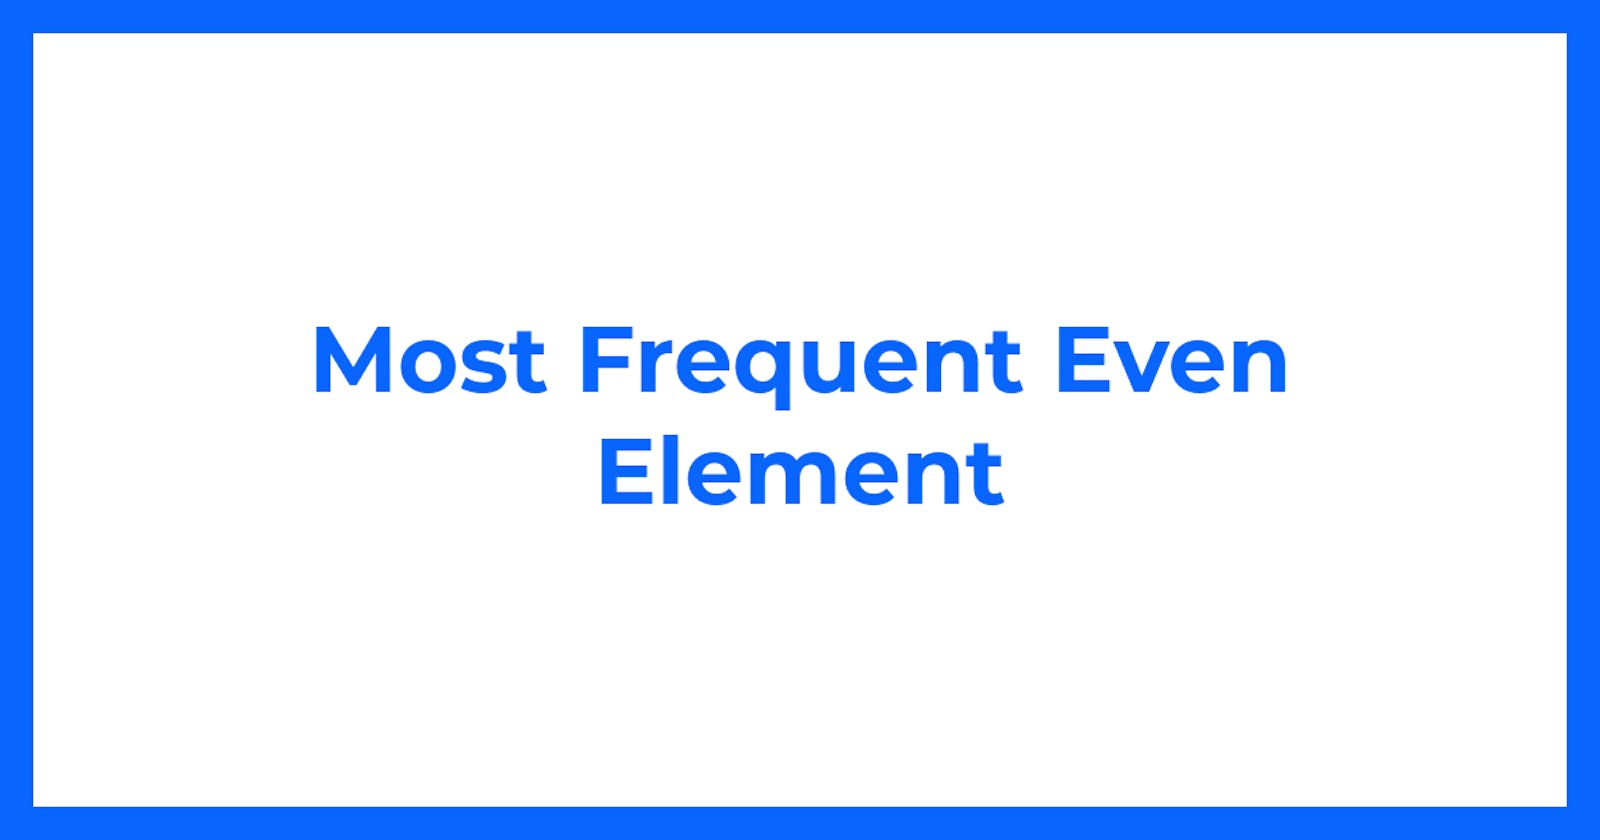 Most Frequent Even Element